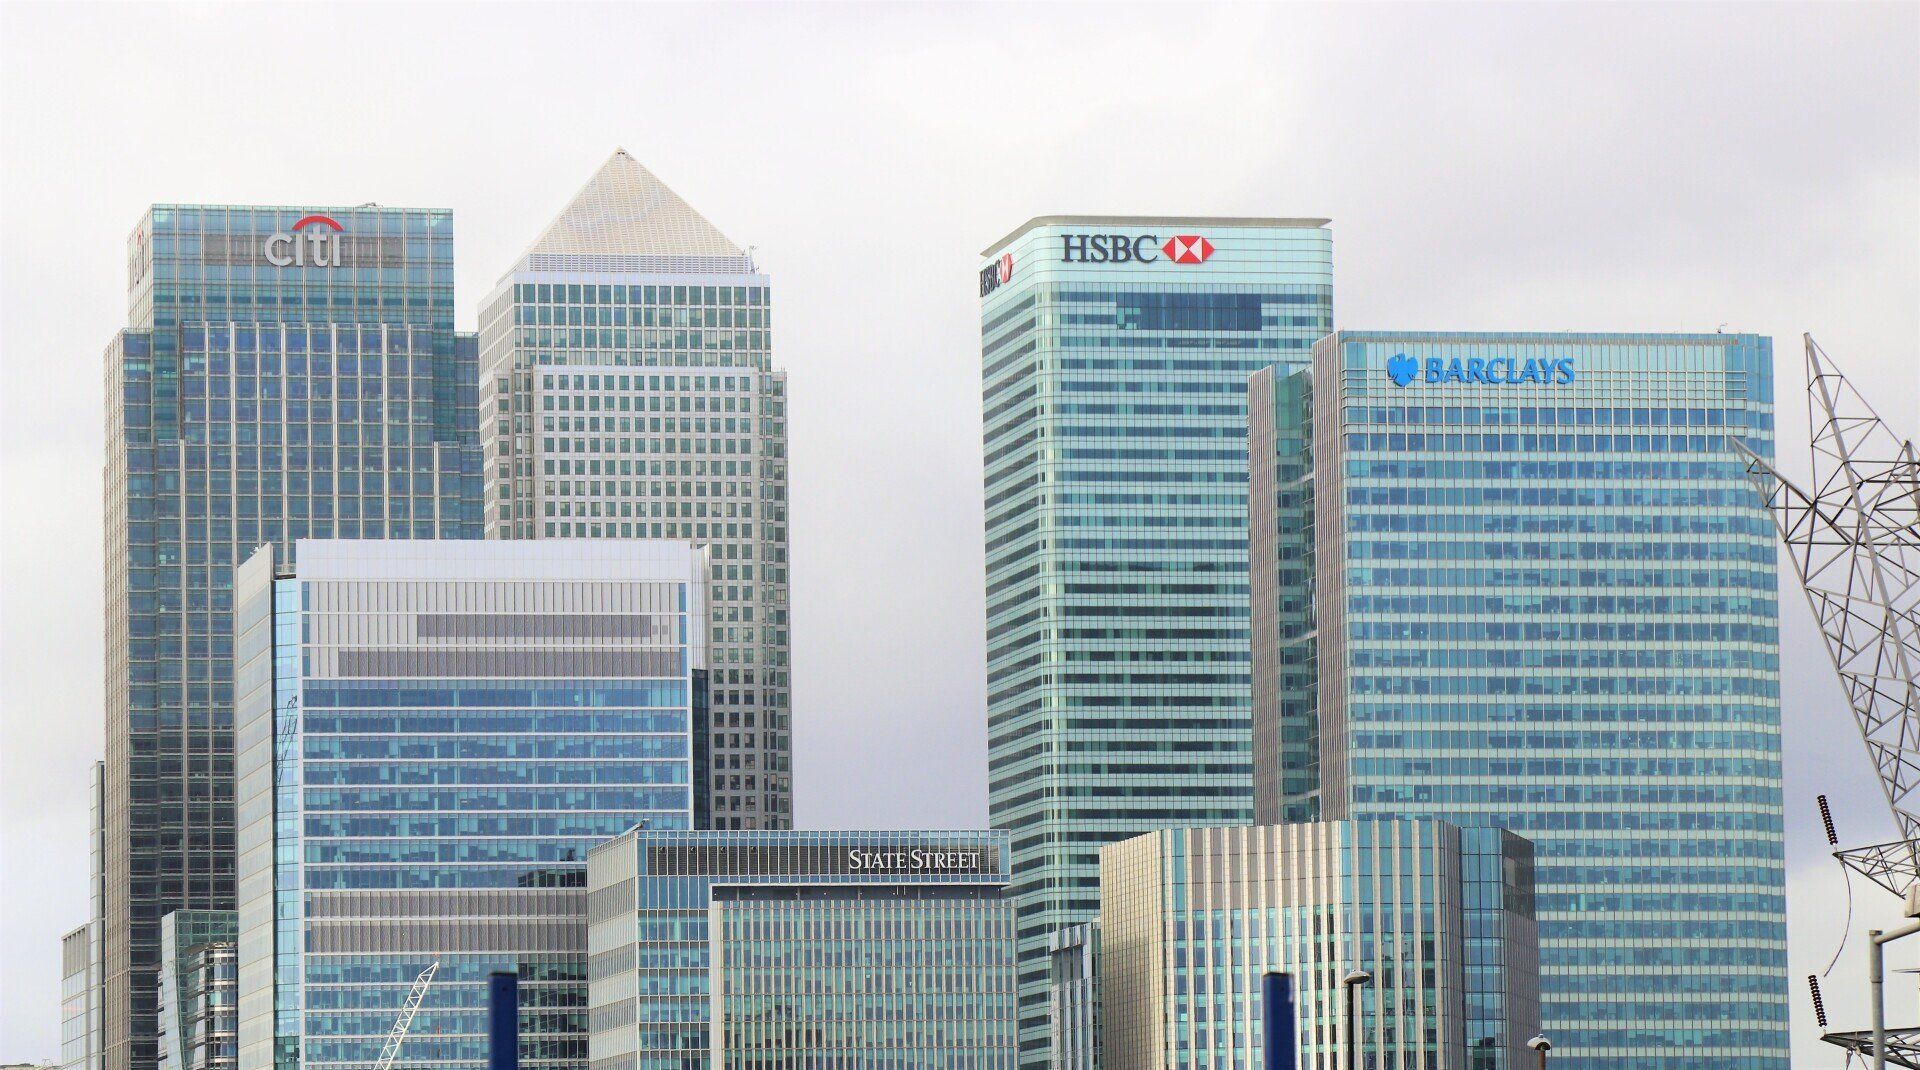 A picture of Canary Wharf buildings including the Barclays bank building, Citi Bank, HSBC, State Street and the original Canary Wharf tower